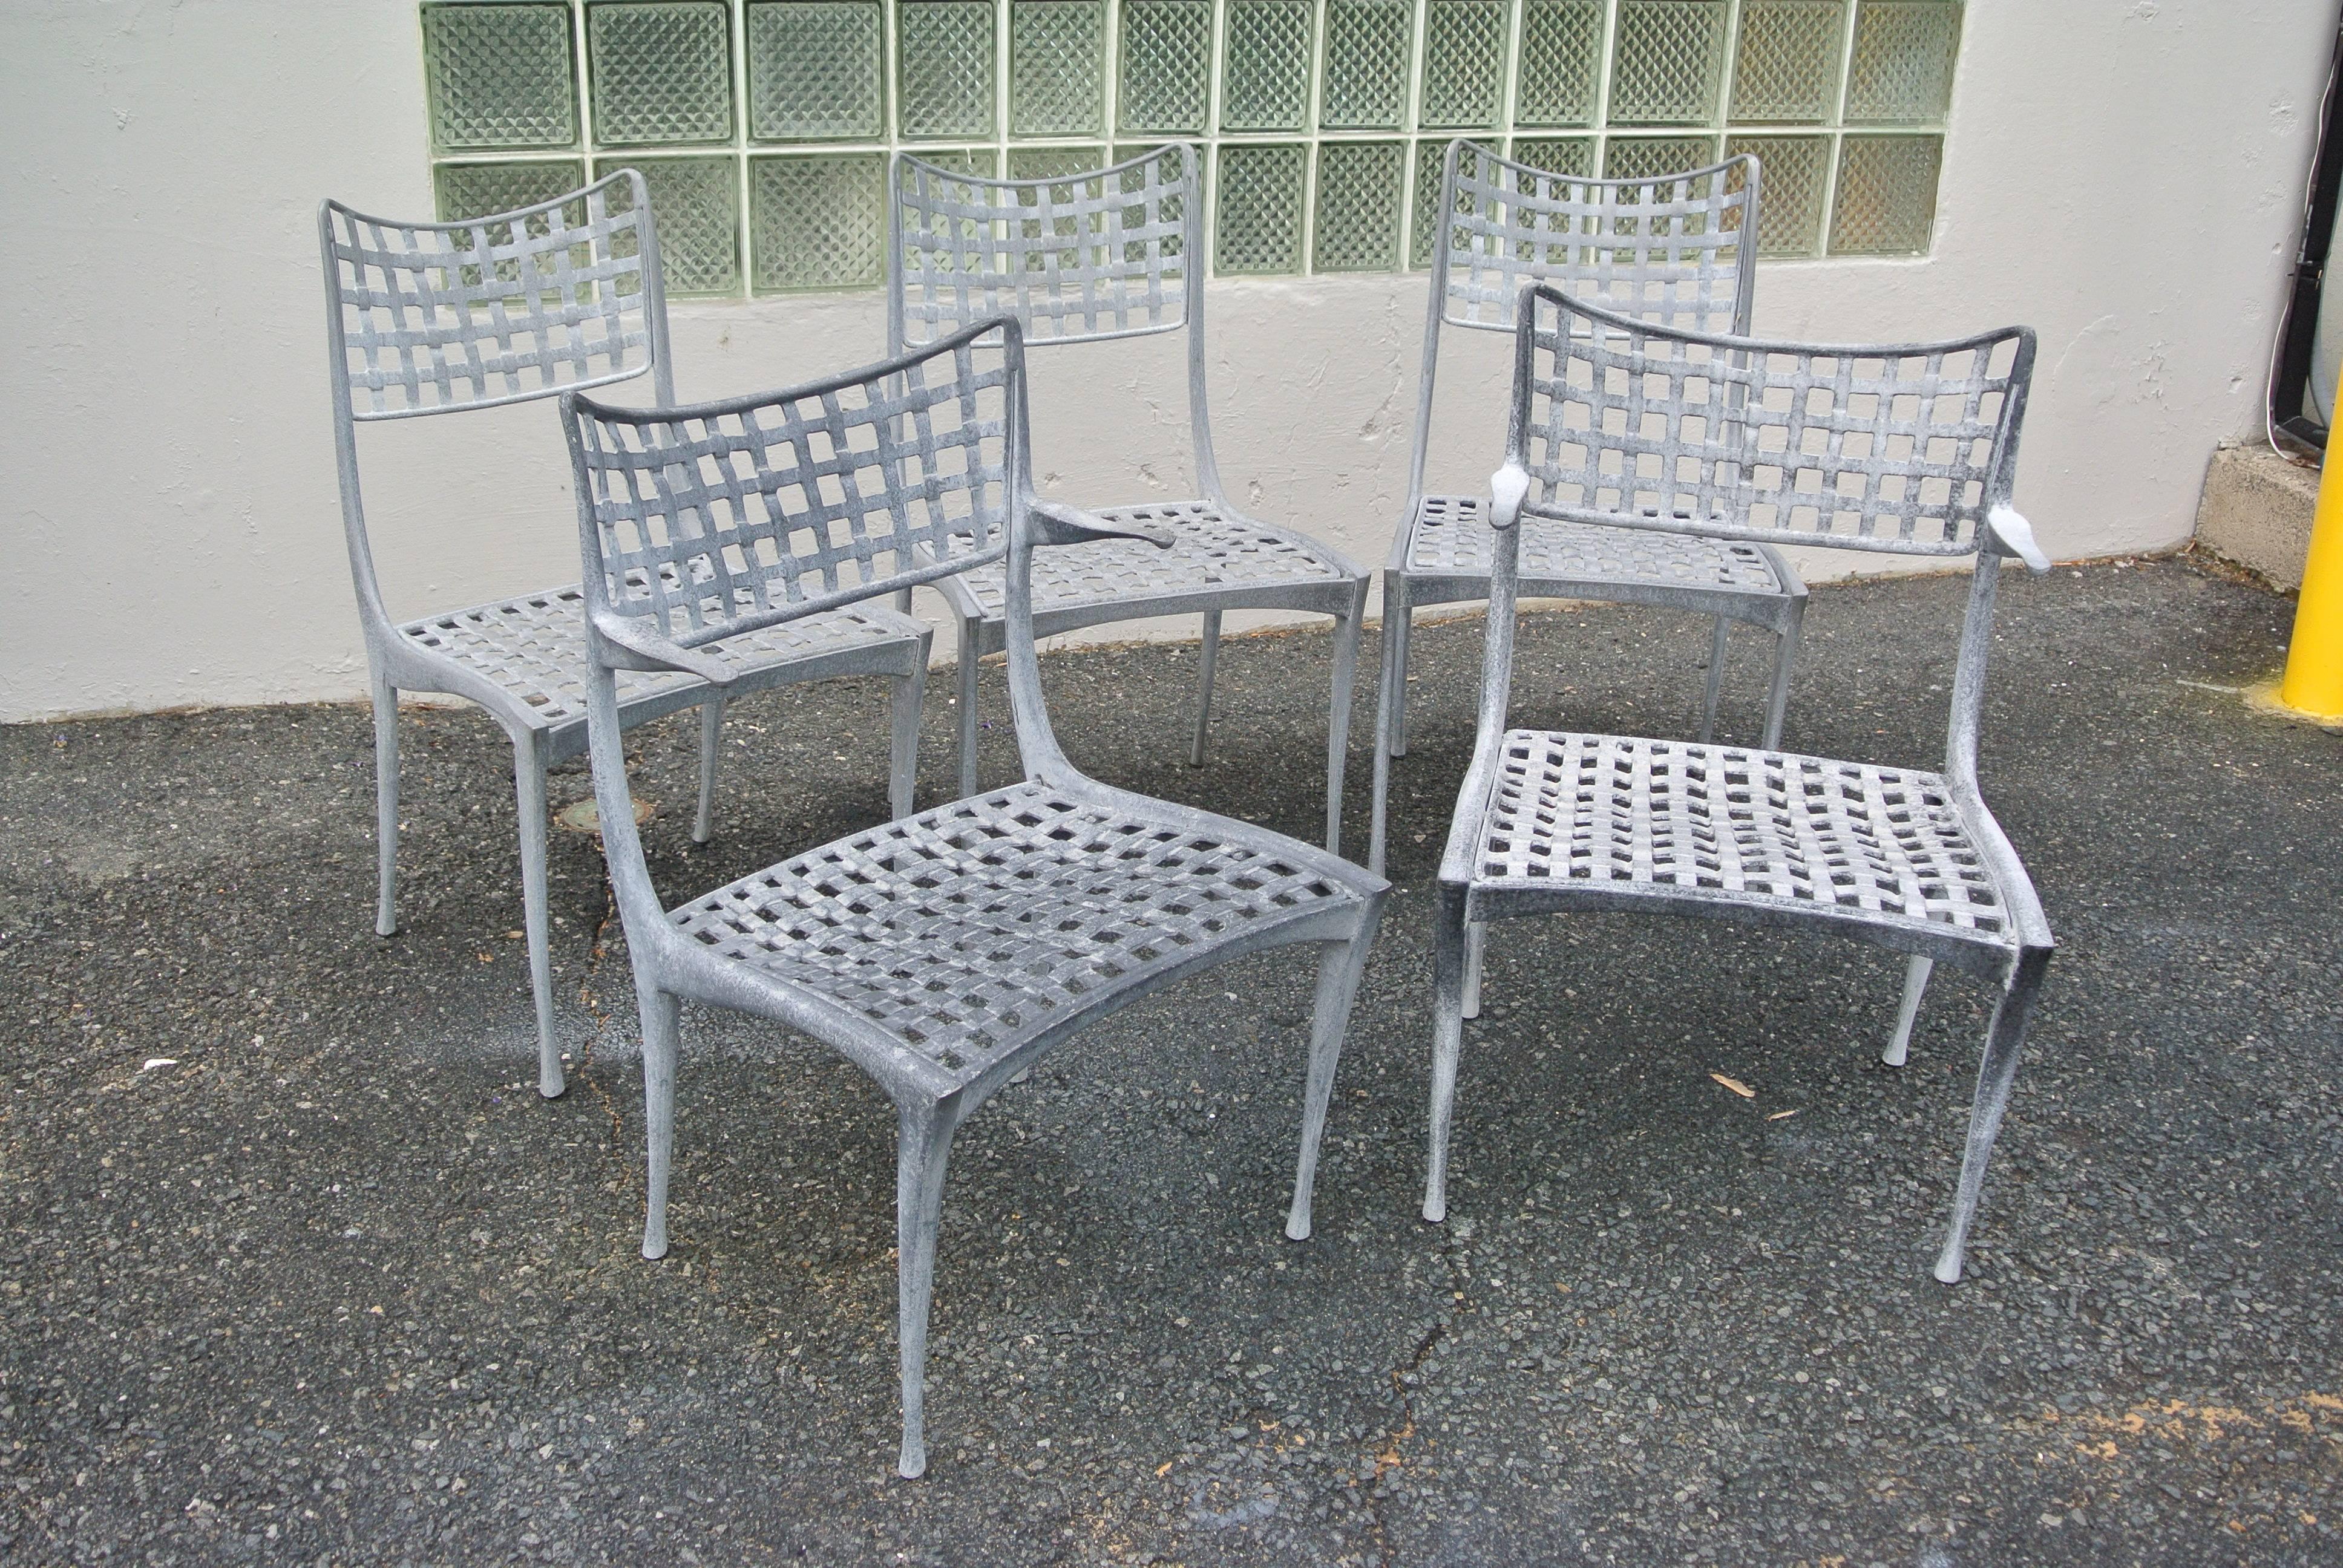 Set of five Sol Y Luna aluminum patio chairs by Brown Jordan. The set includes two armchairs and three side chairs.